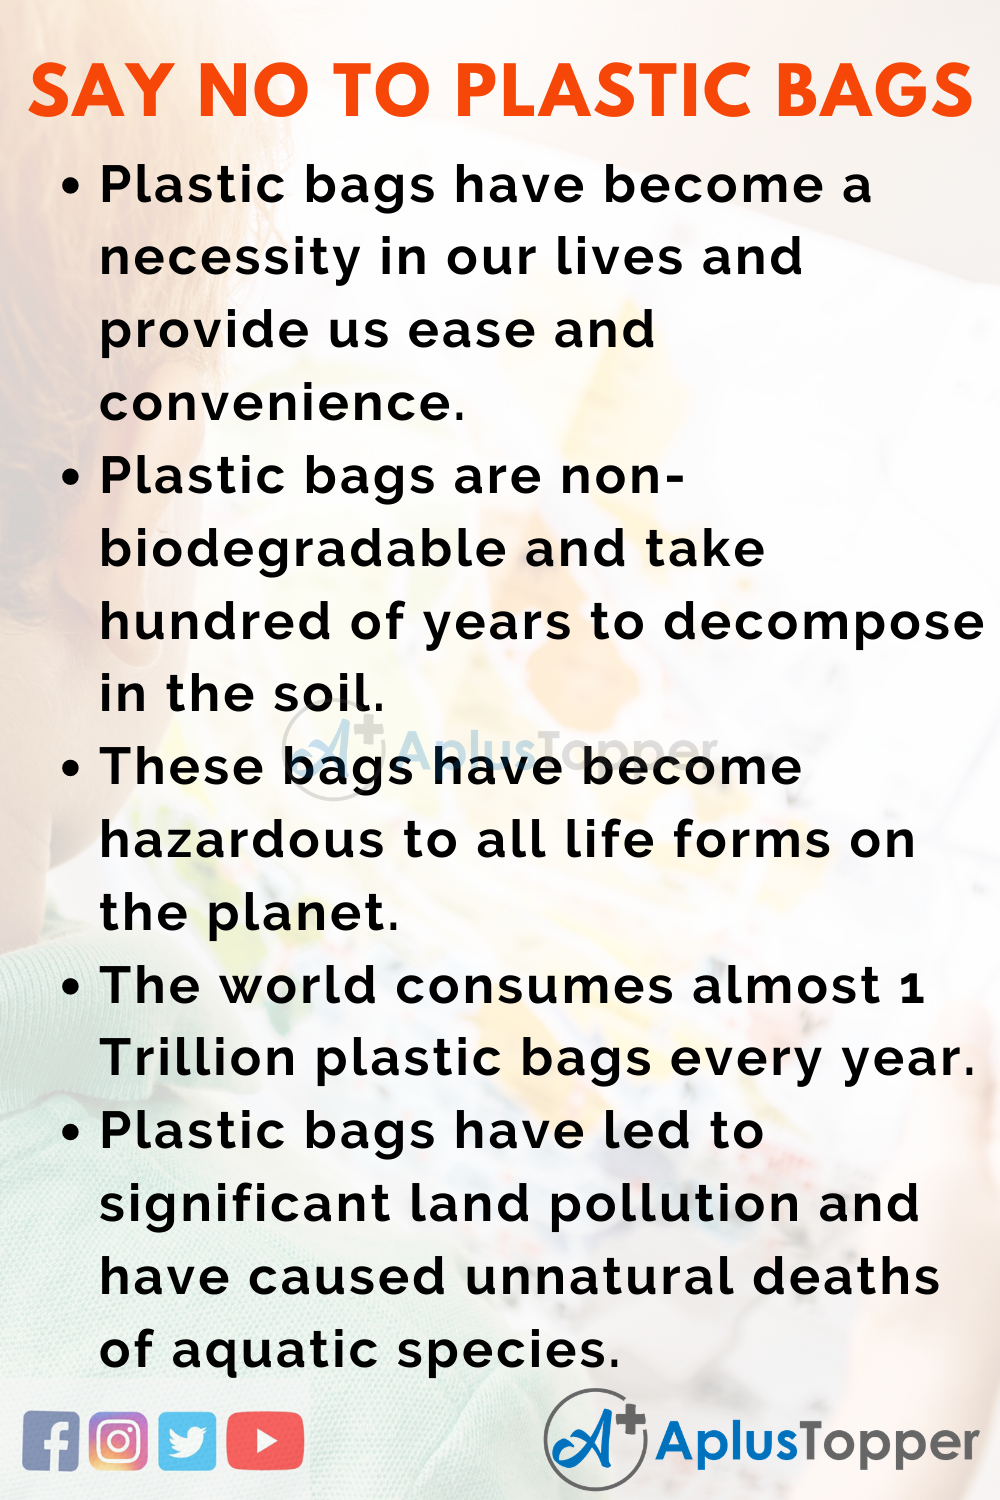 Are Compostable Bags the Best Alternative to Plastic Bags?